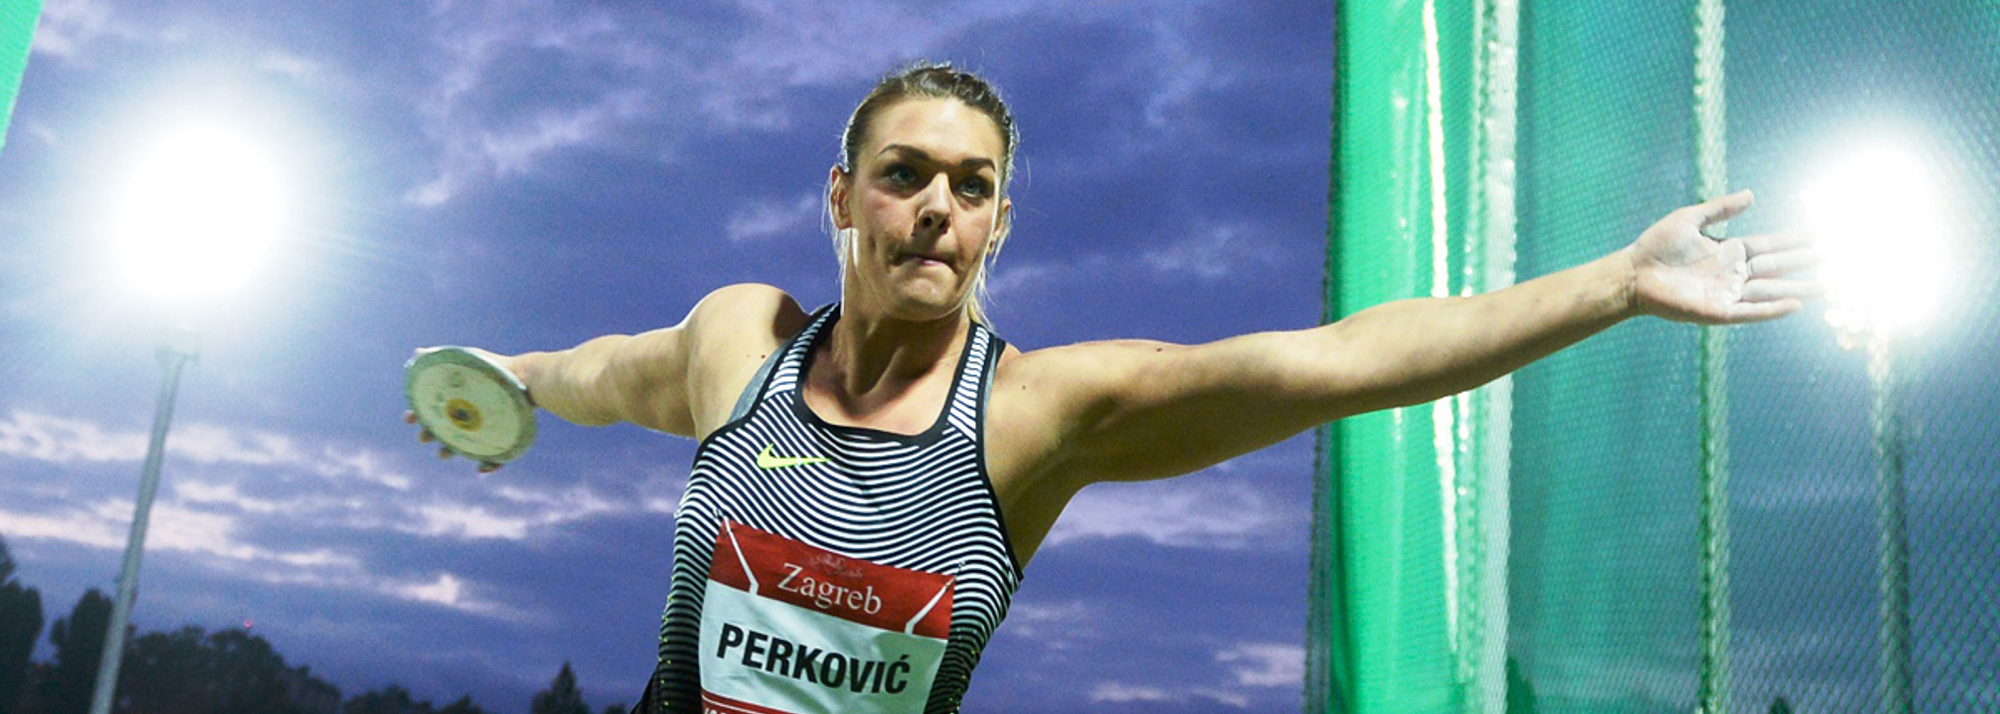 As is now tradition, local heroines Sandra Perkovic and Sara Kolak will serve as both headline acts and meeting poster girls for the Hanzekovic Memorial in the Croatian capital Zagreb, the final IAAF World Challenge meeting of 2019, on Tuesday (3).